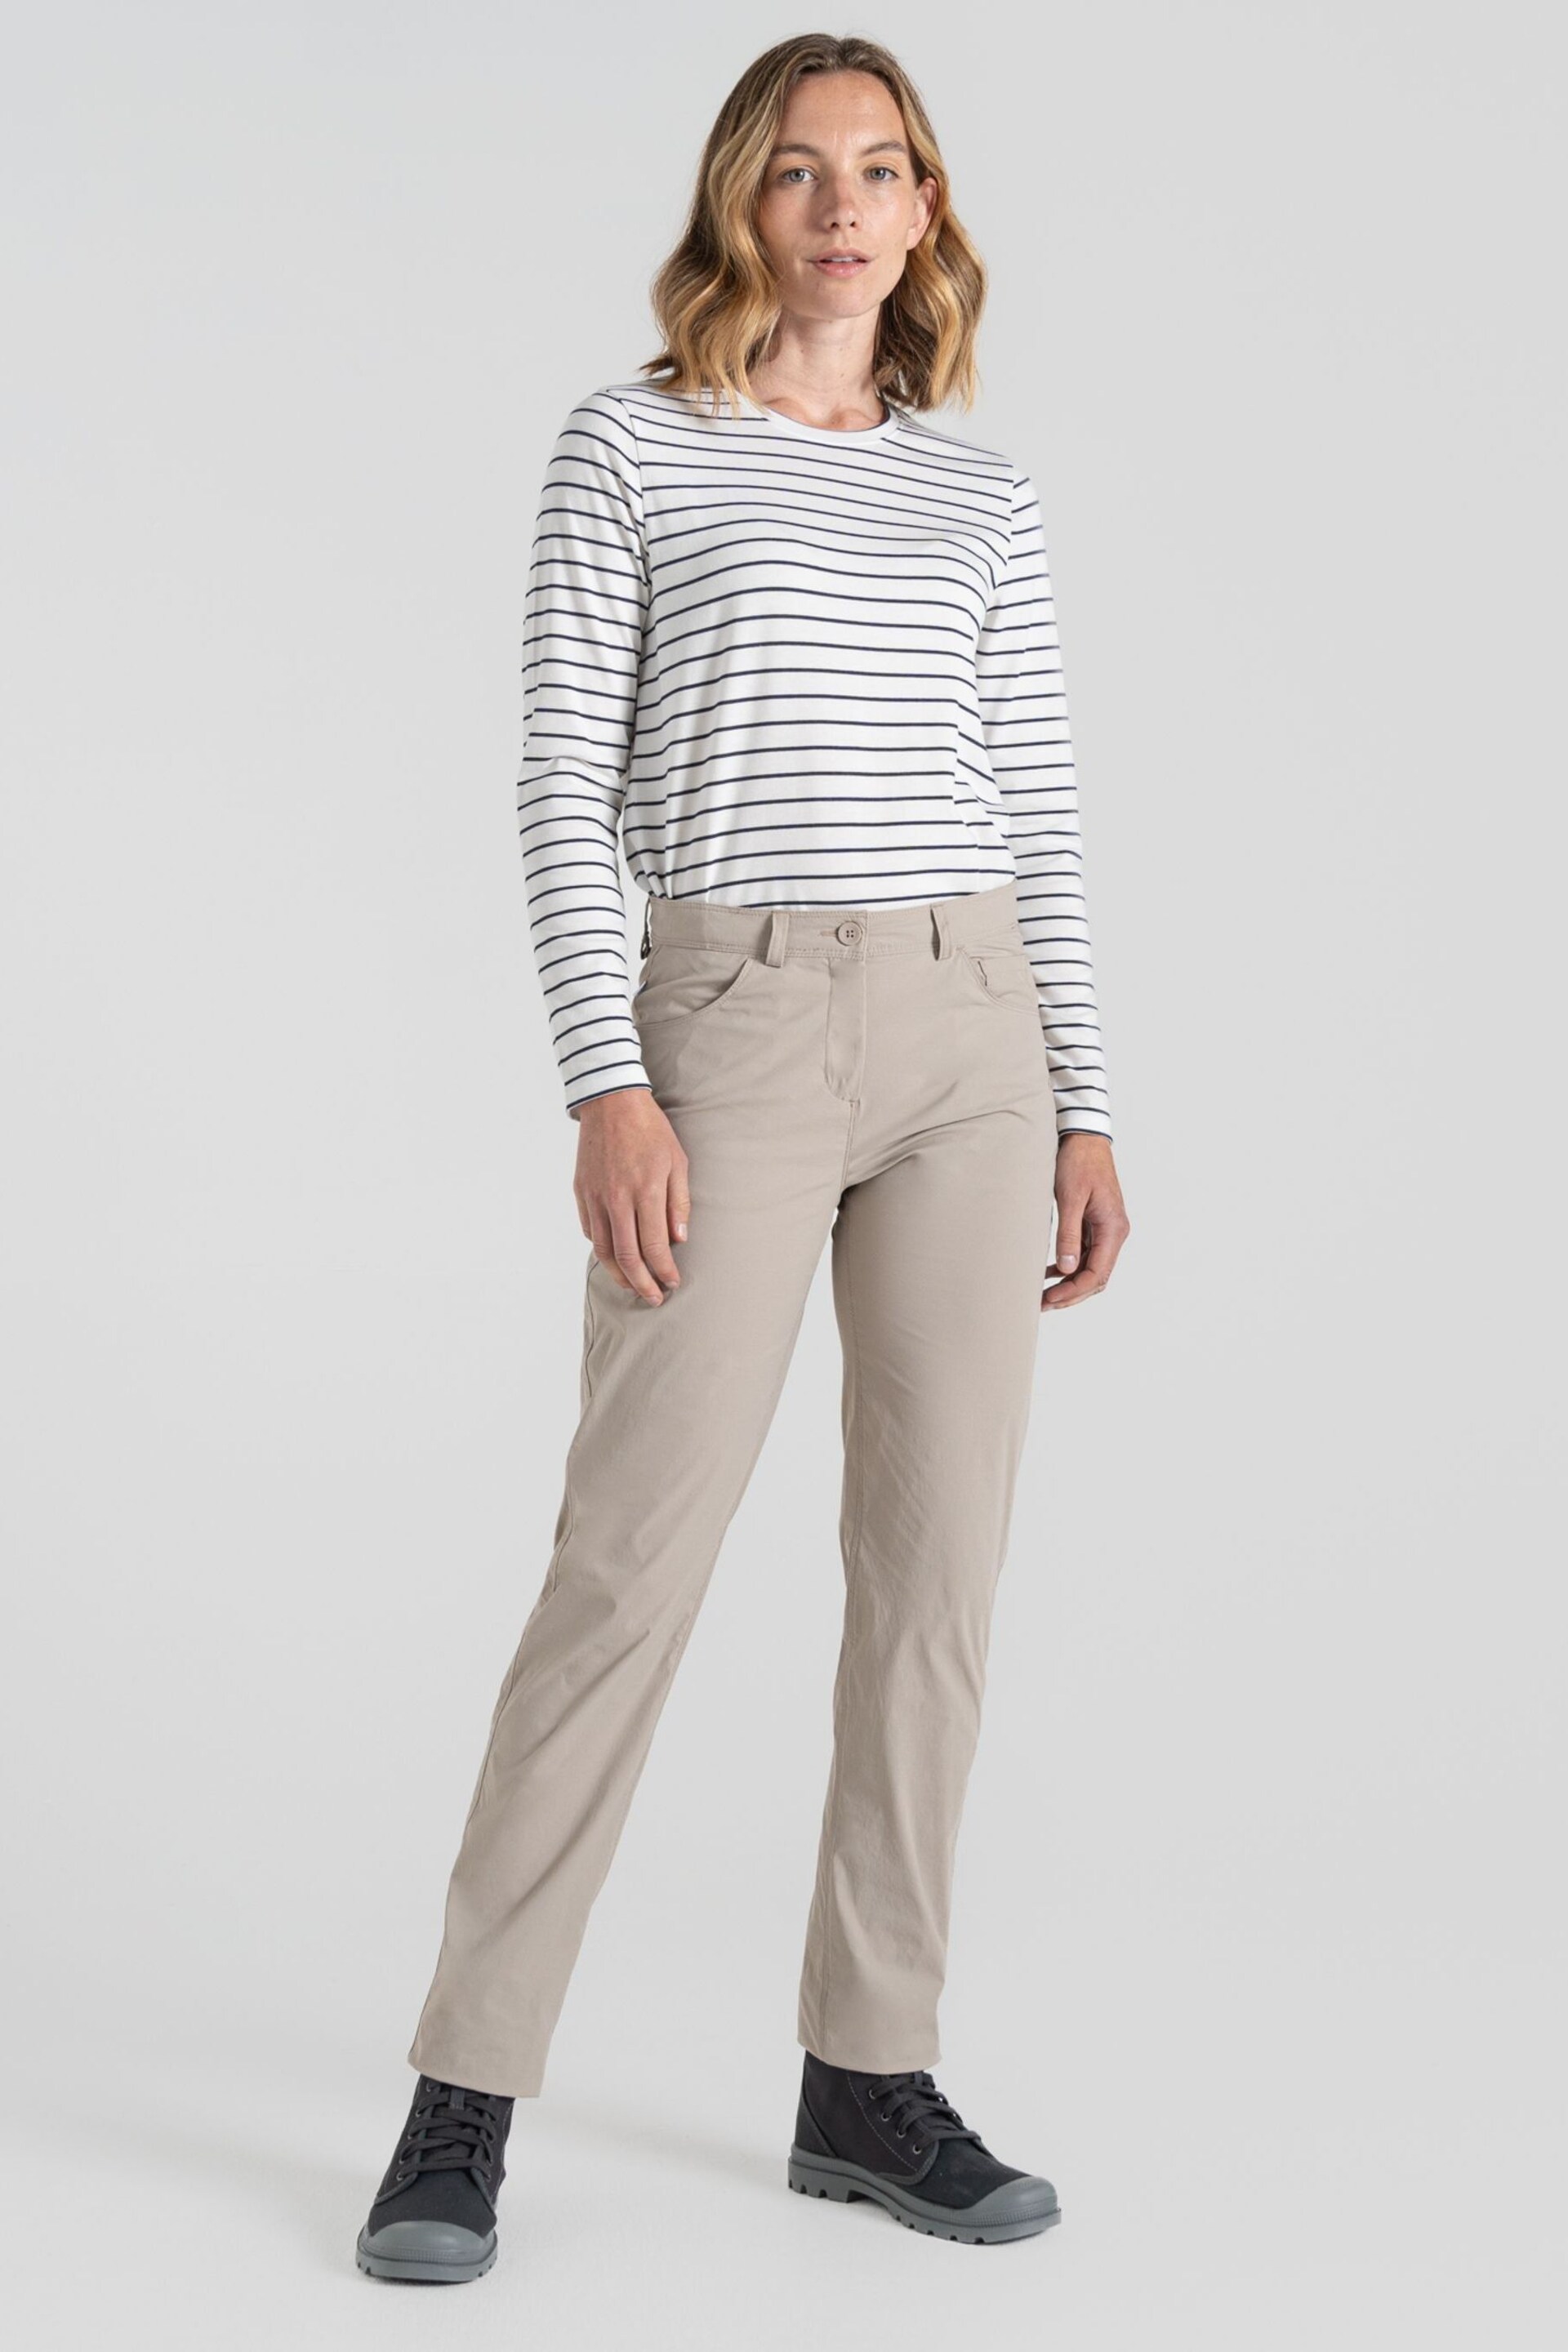 Craghoppers NL Milla Brown Trousers - Image 1 of 5